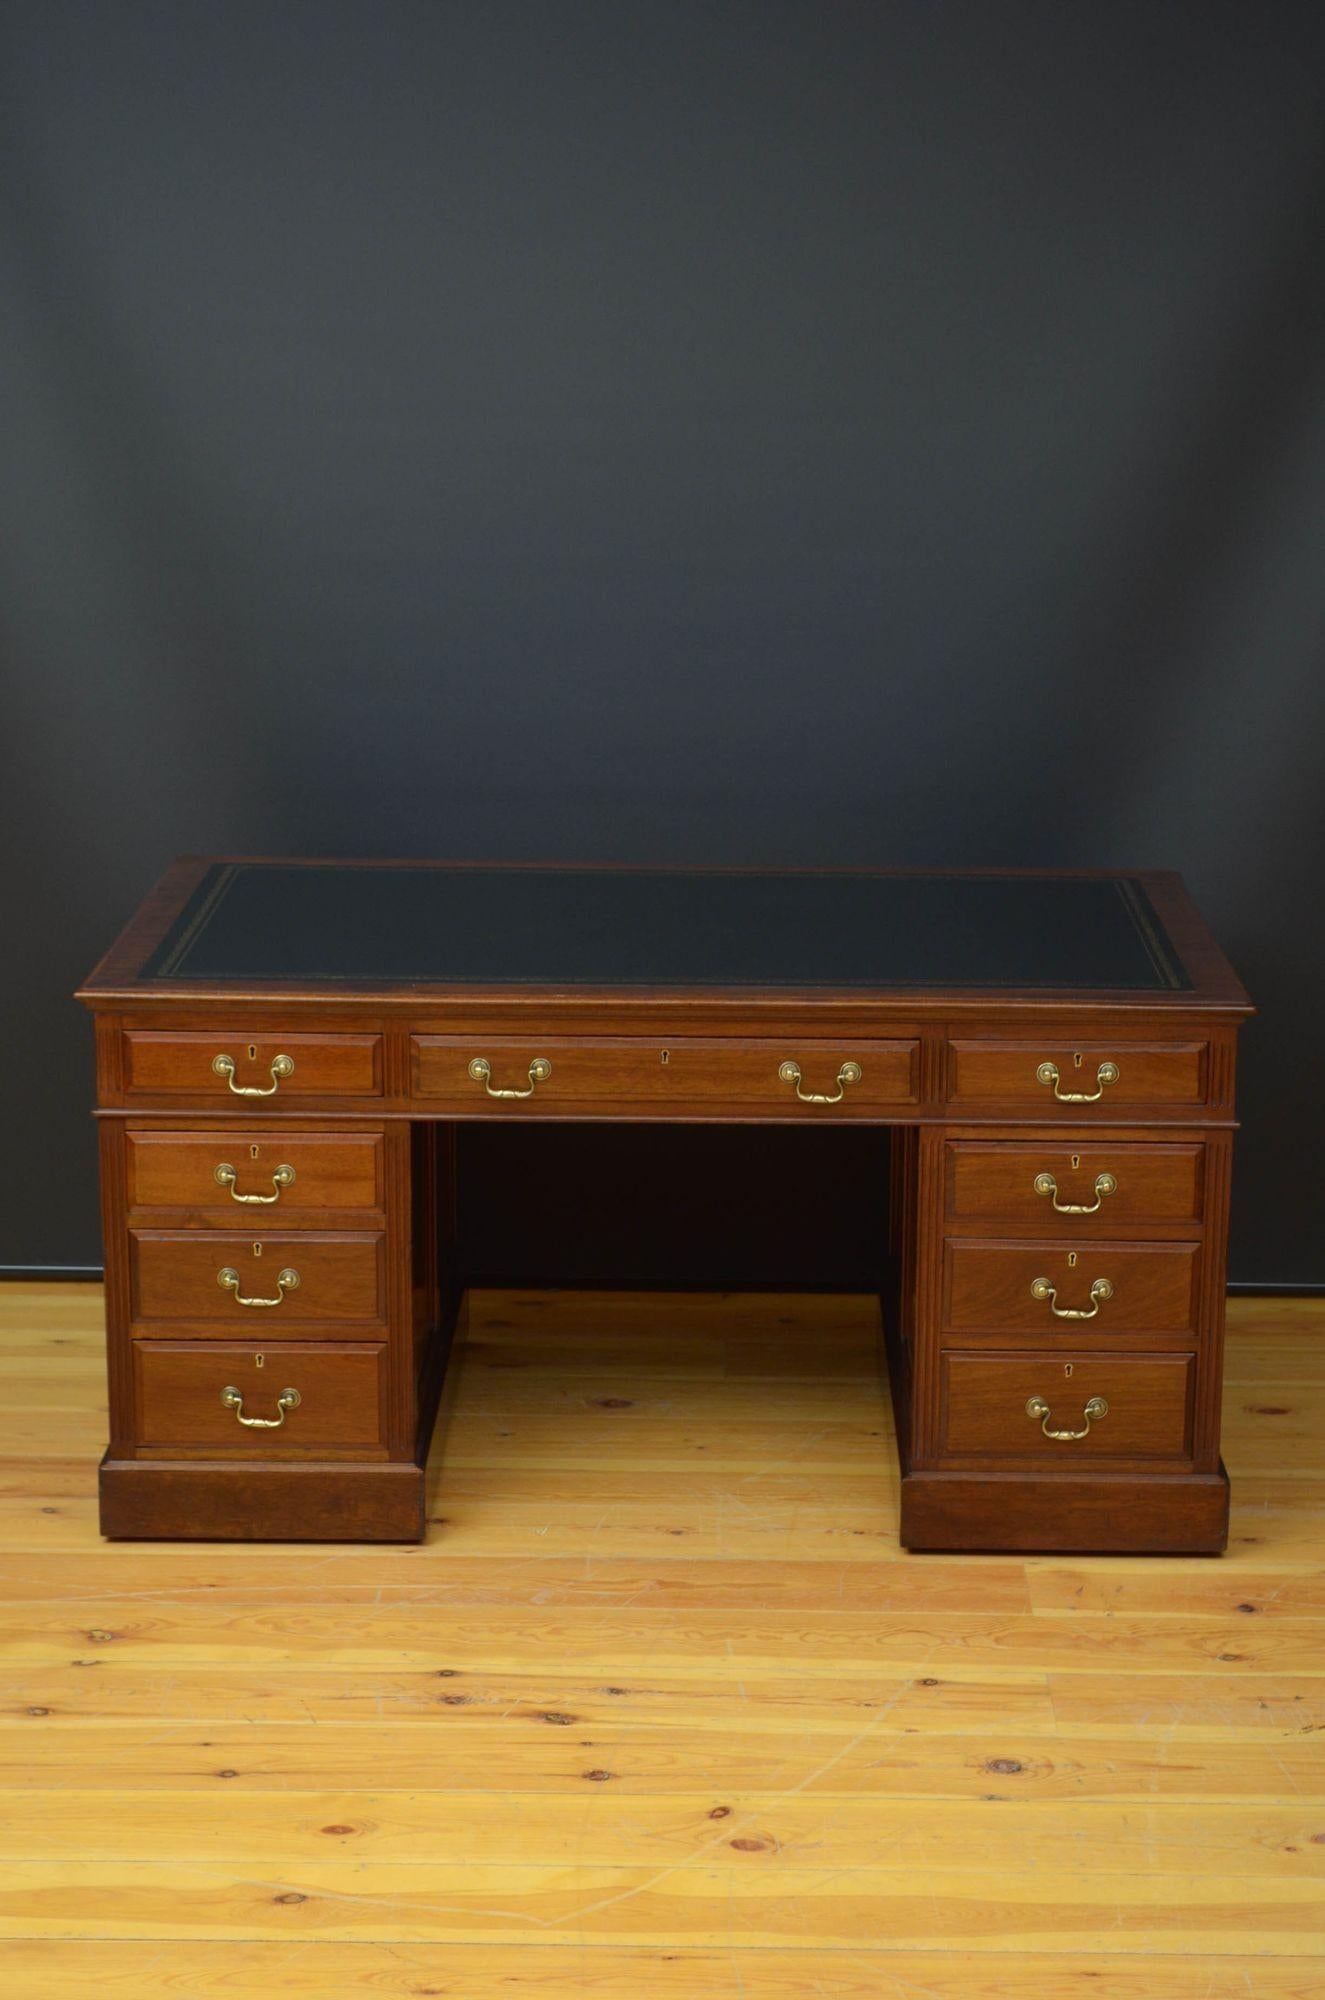 Sn5279 A large late Victorian mahogany desk, having new black tooled leather to the top above three frieze drawers and three graduated drawers to each pedestal, all mahogany lined, fielded and fitted with original brass handles, standing on moulded